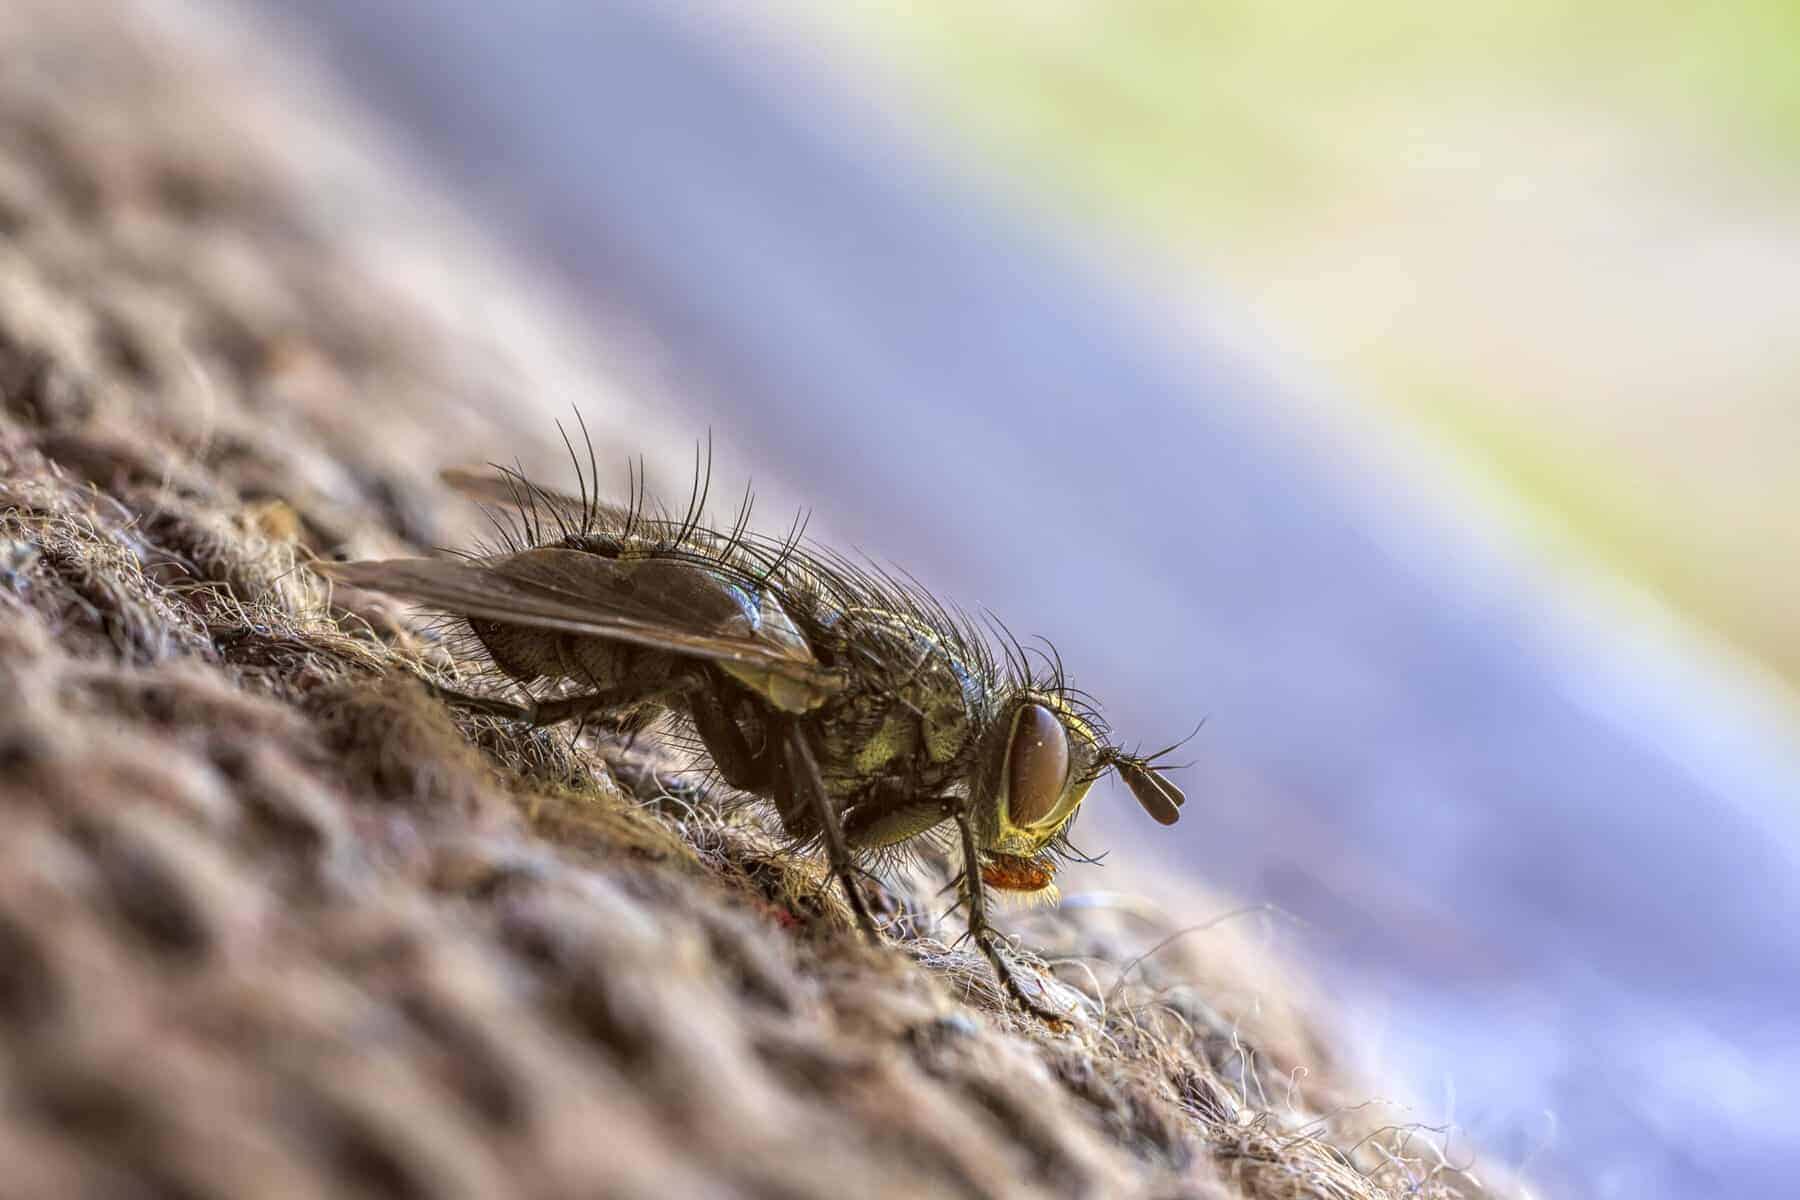 Extreme Closeup of a Fly